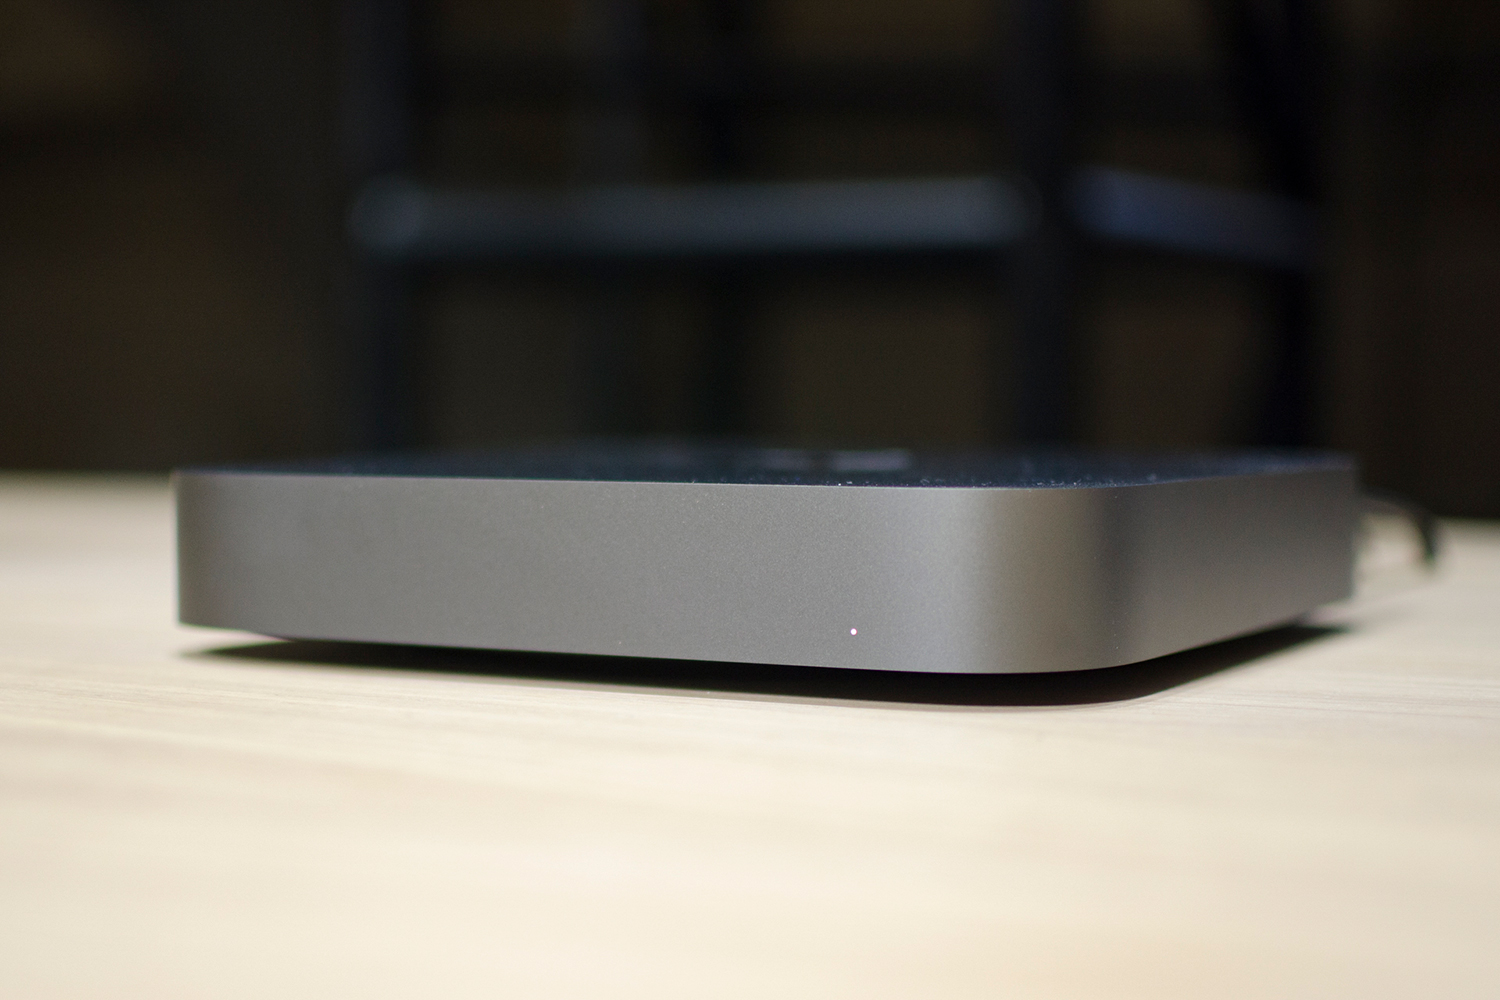 The Mac Mini Buying Guide: How to Pick the Right Micro Desktop